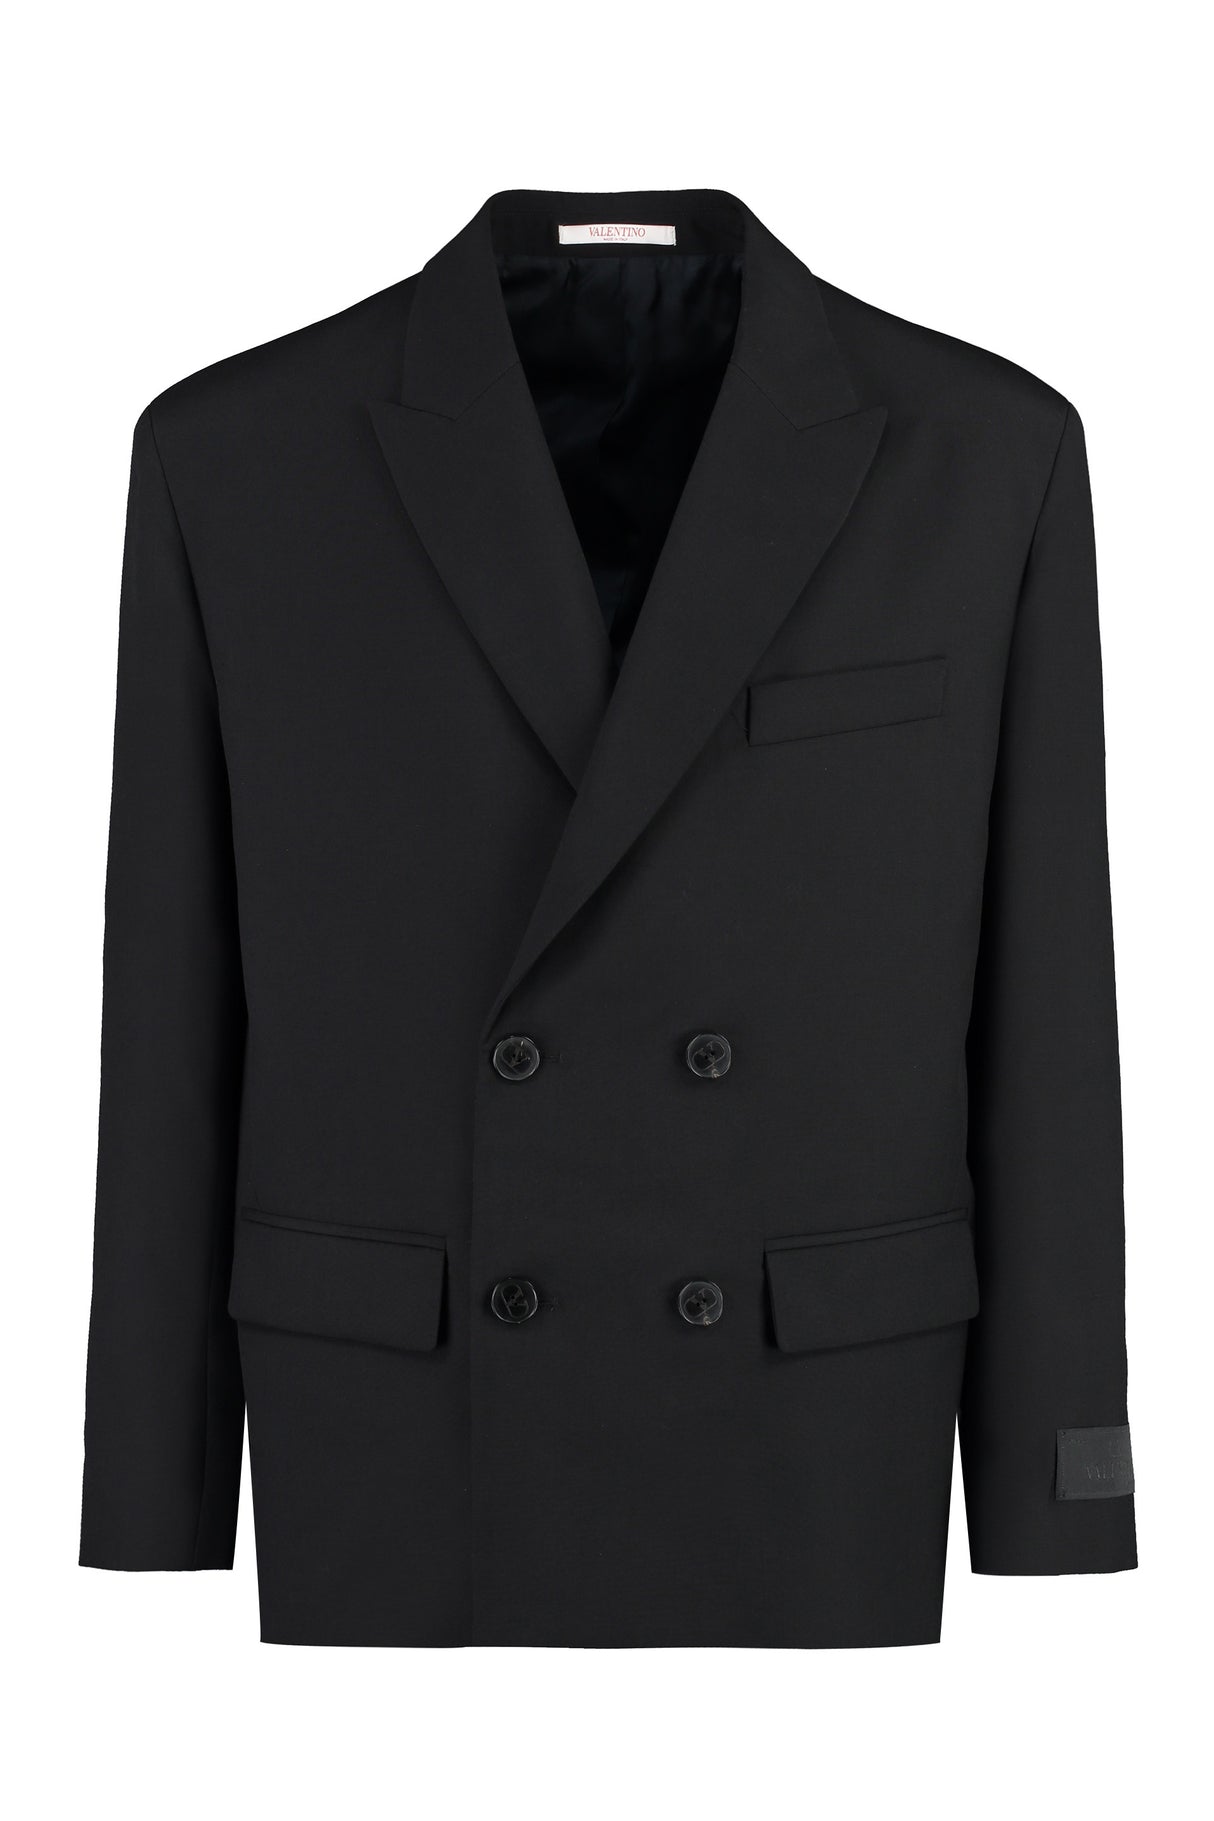 VALENTINO Black Double-Breasted Wool Blazer for Men - FW23 Collection